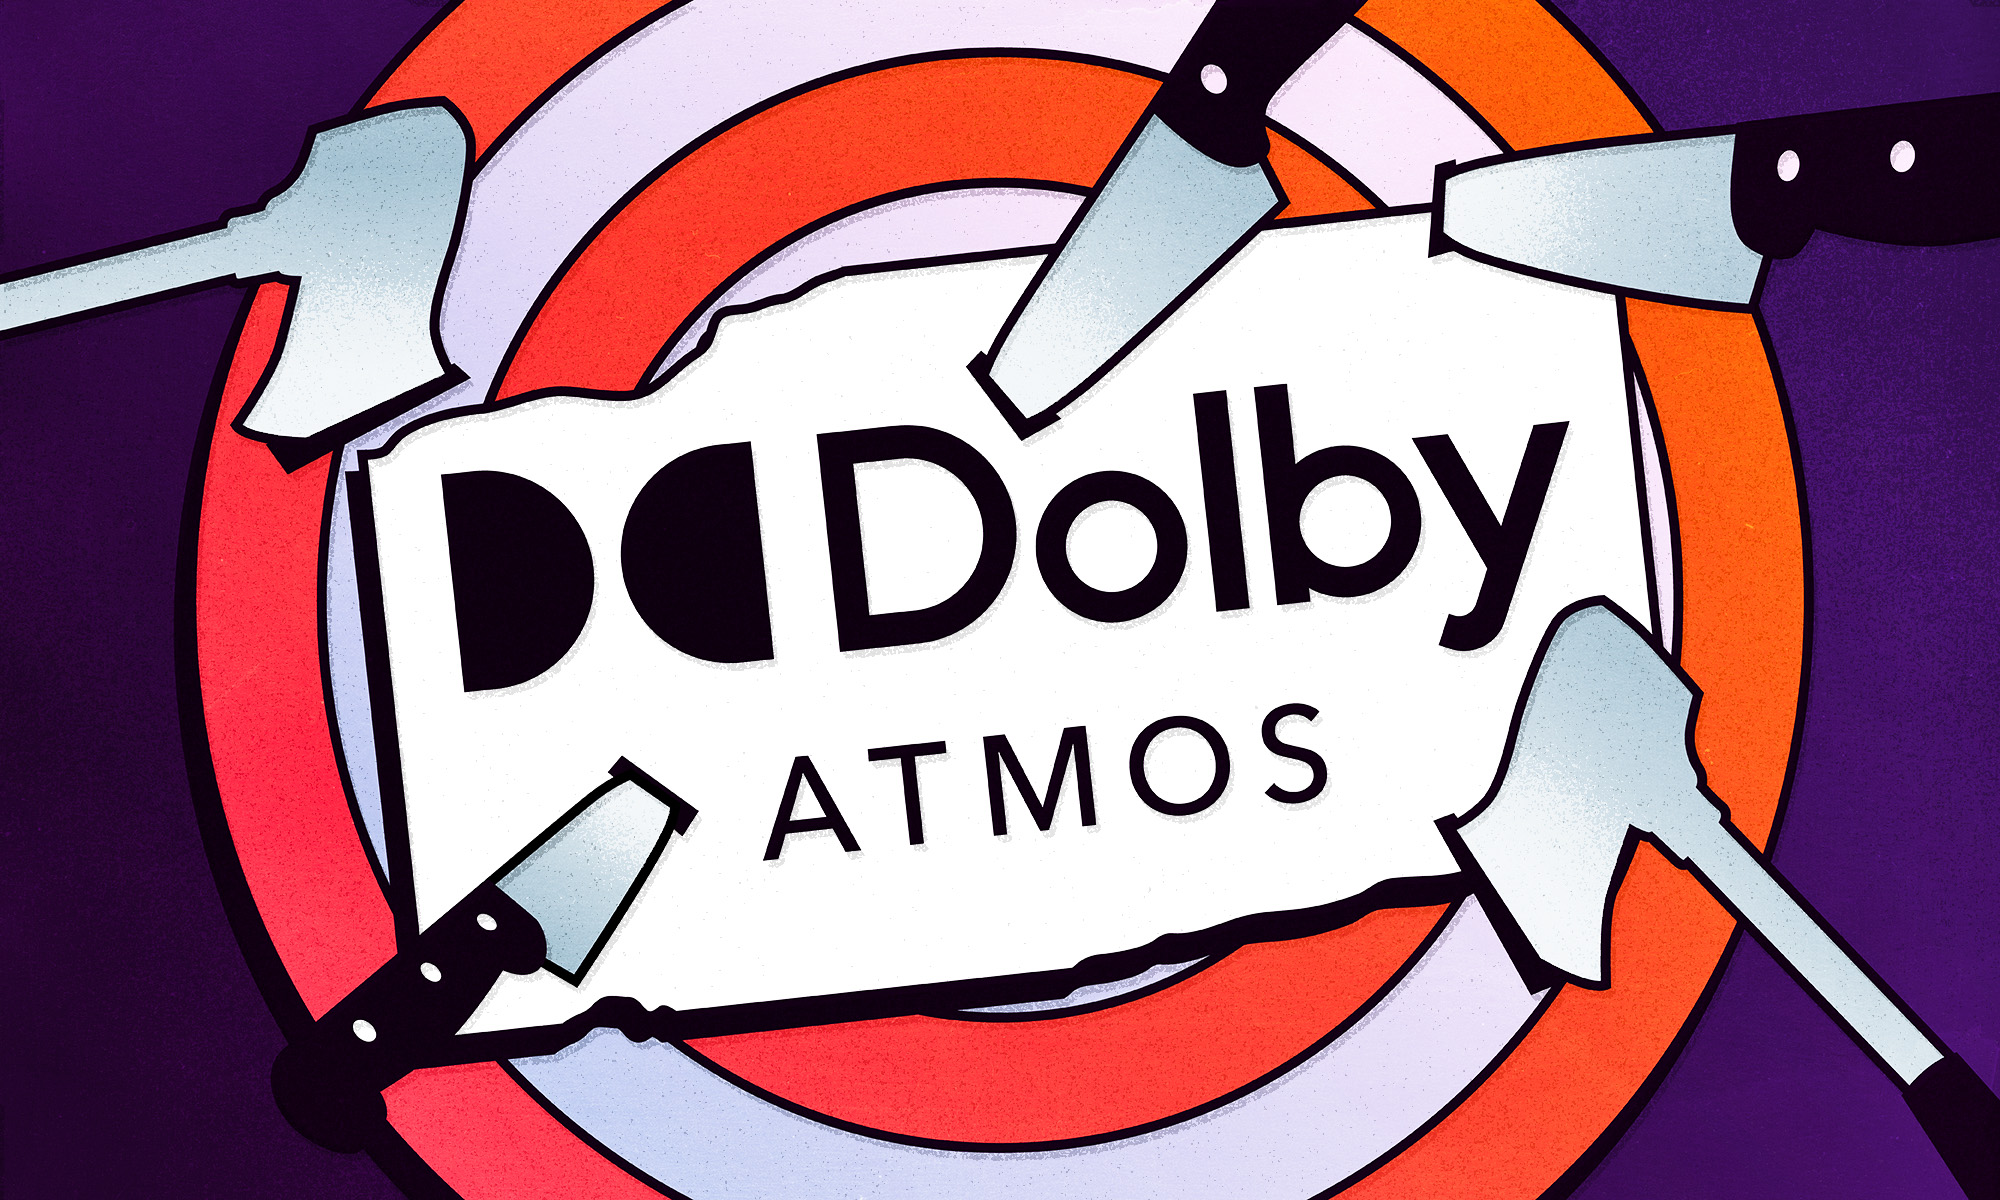 https://www.digitaltrends.com/wp-content/uploads/2023/12/Dolby-Atmos-Under-Attack.jpg?fit=2000%2C1200&p=1